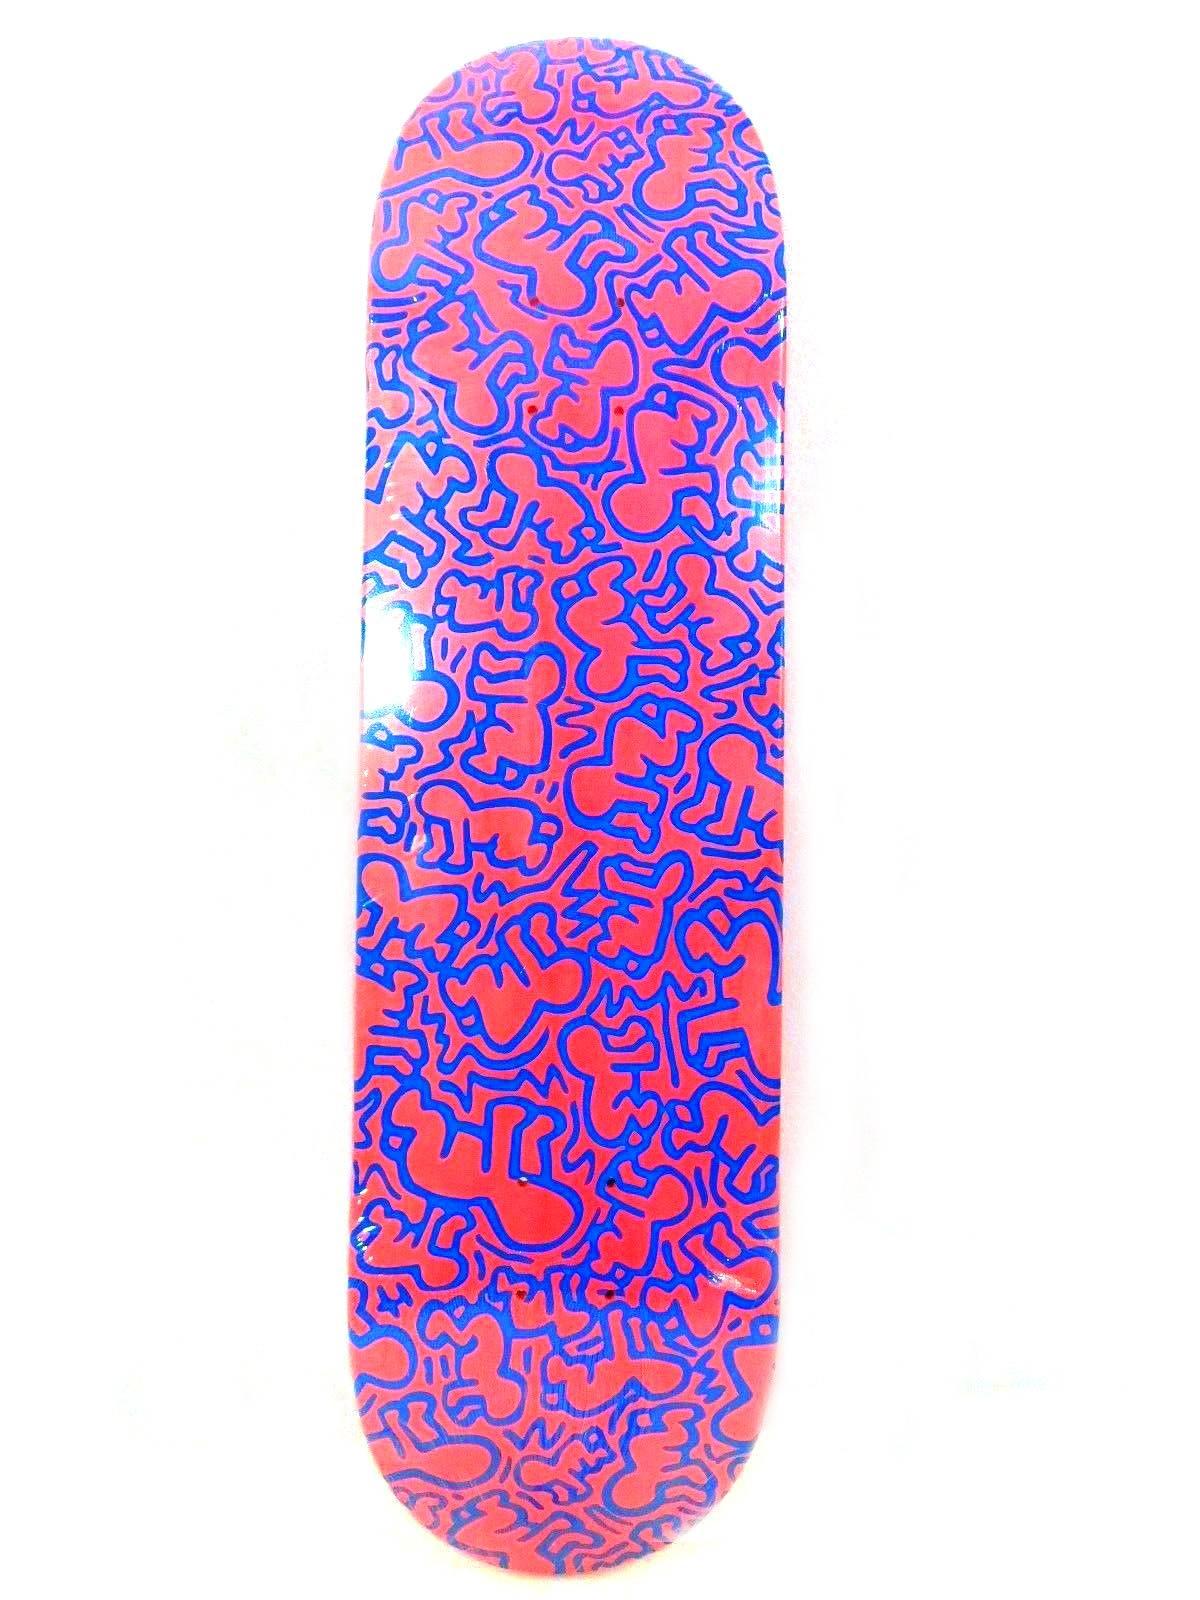 Keith Haring Radiant Baby Skate Deck  - Pop Art Art by (after) Keith Haring